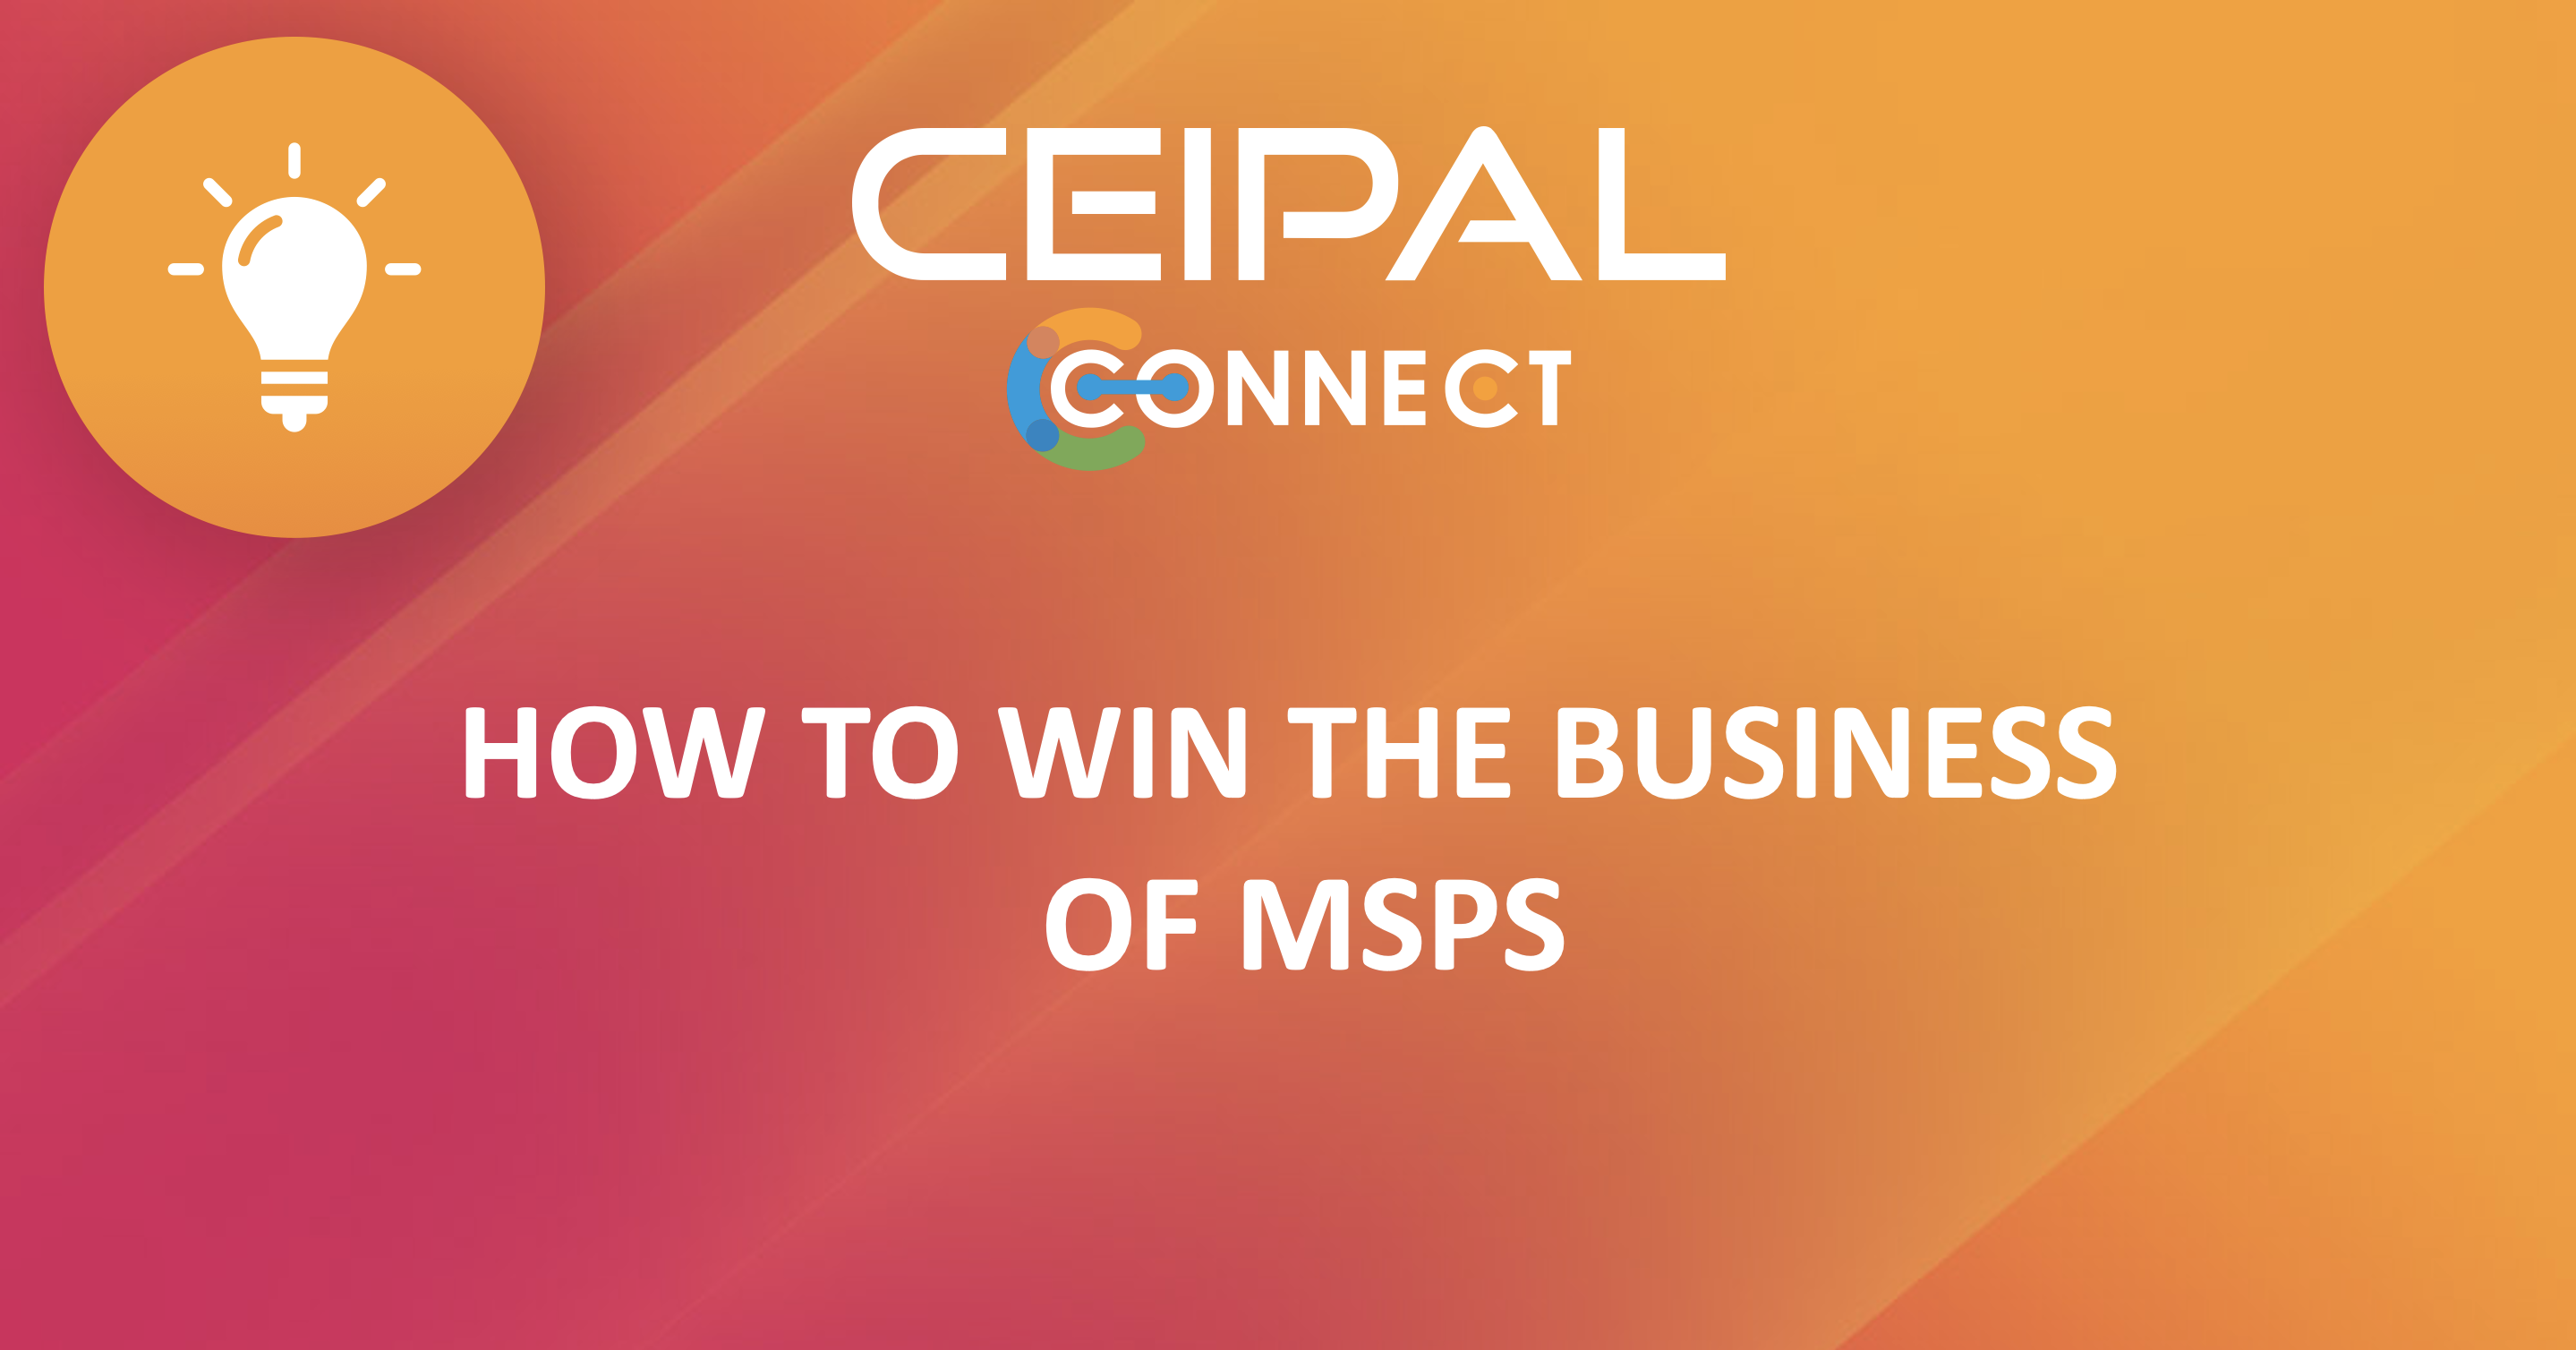 How to Win the Business of MSPs